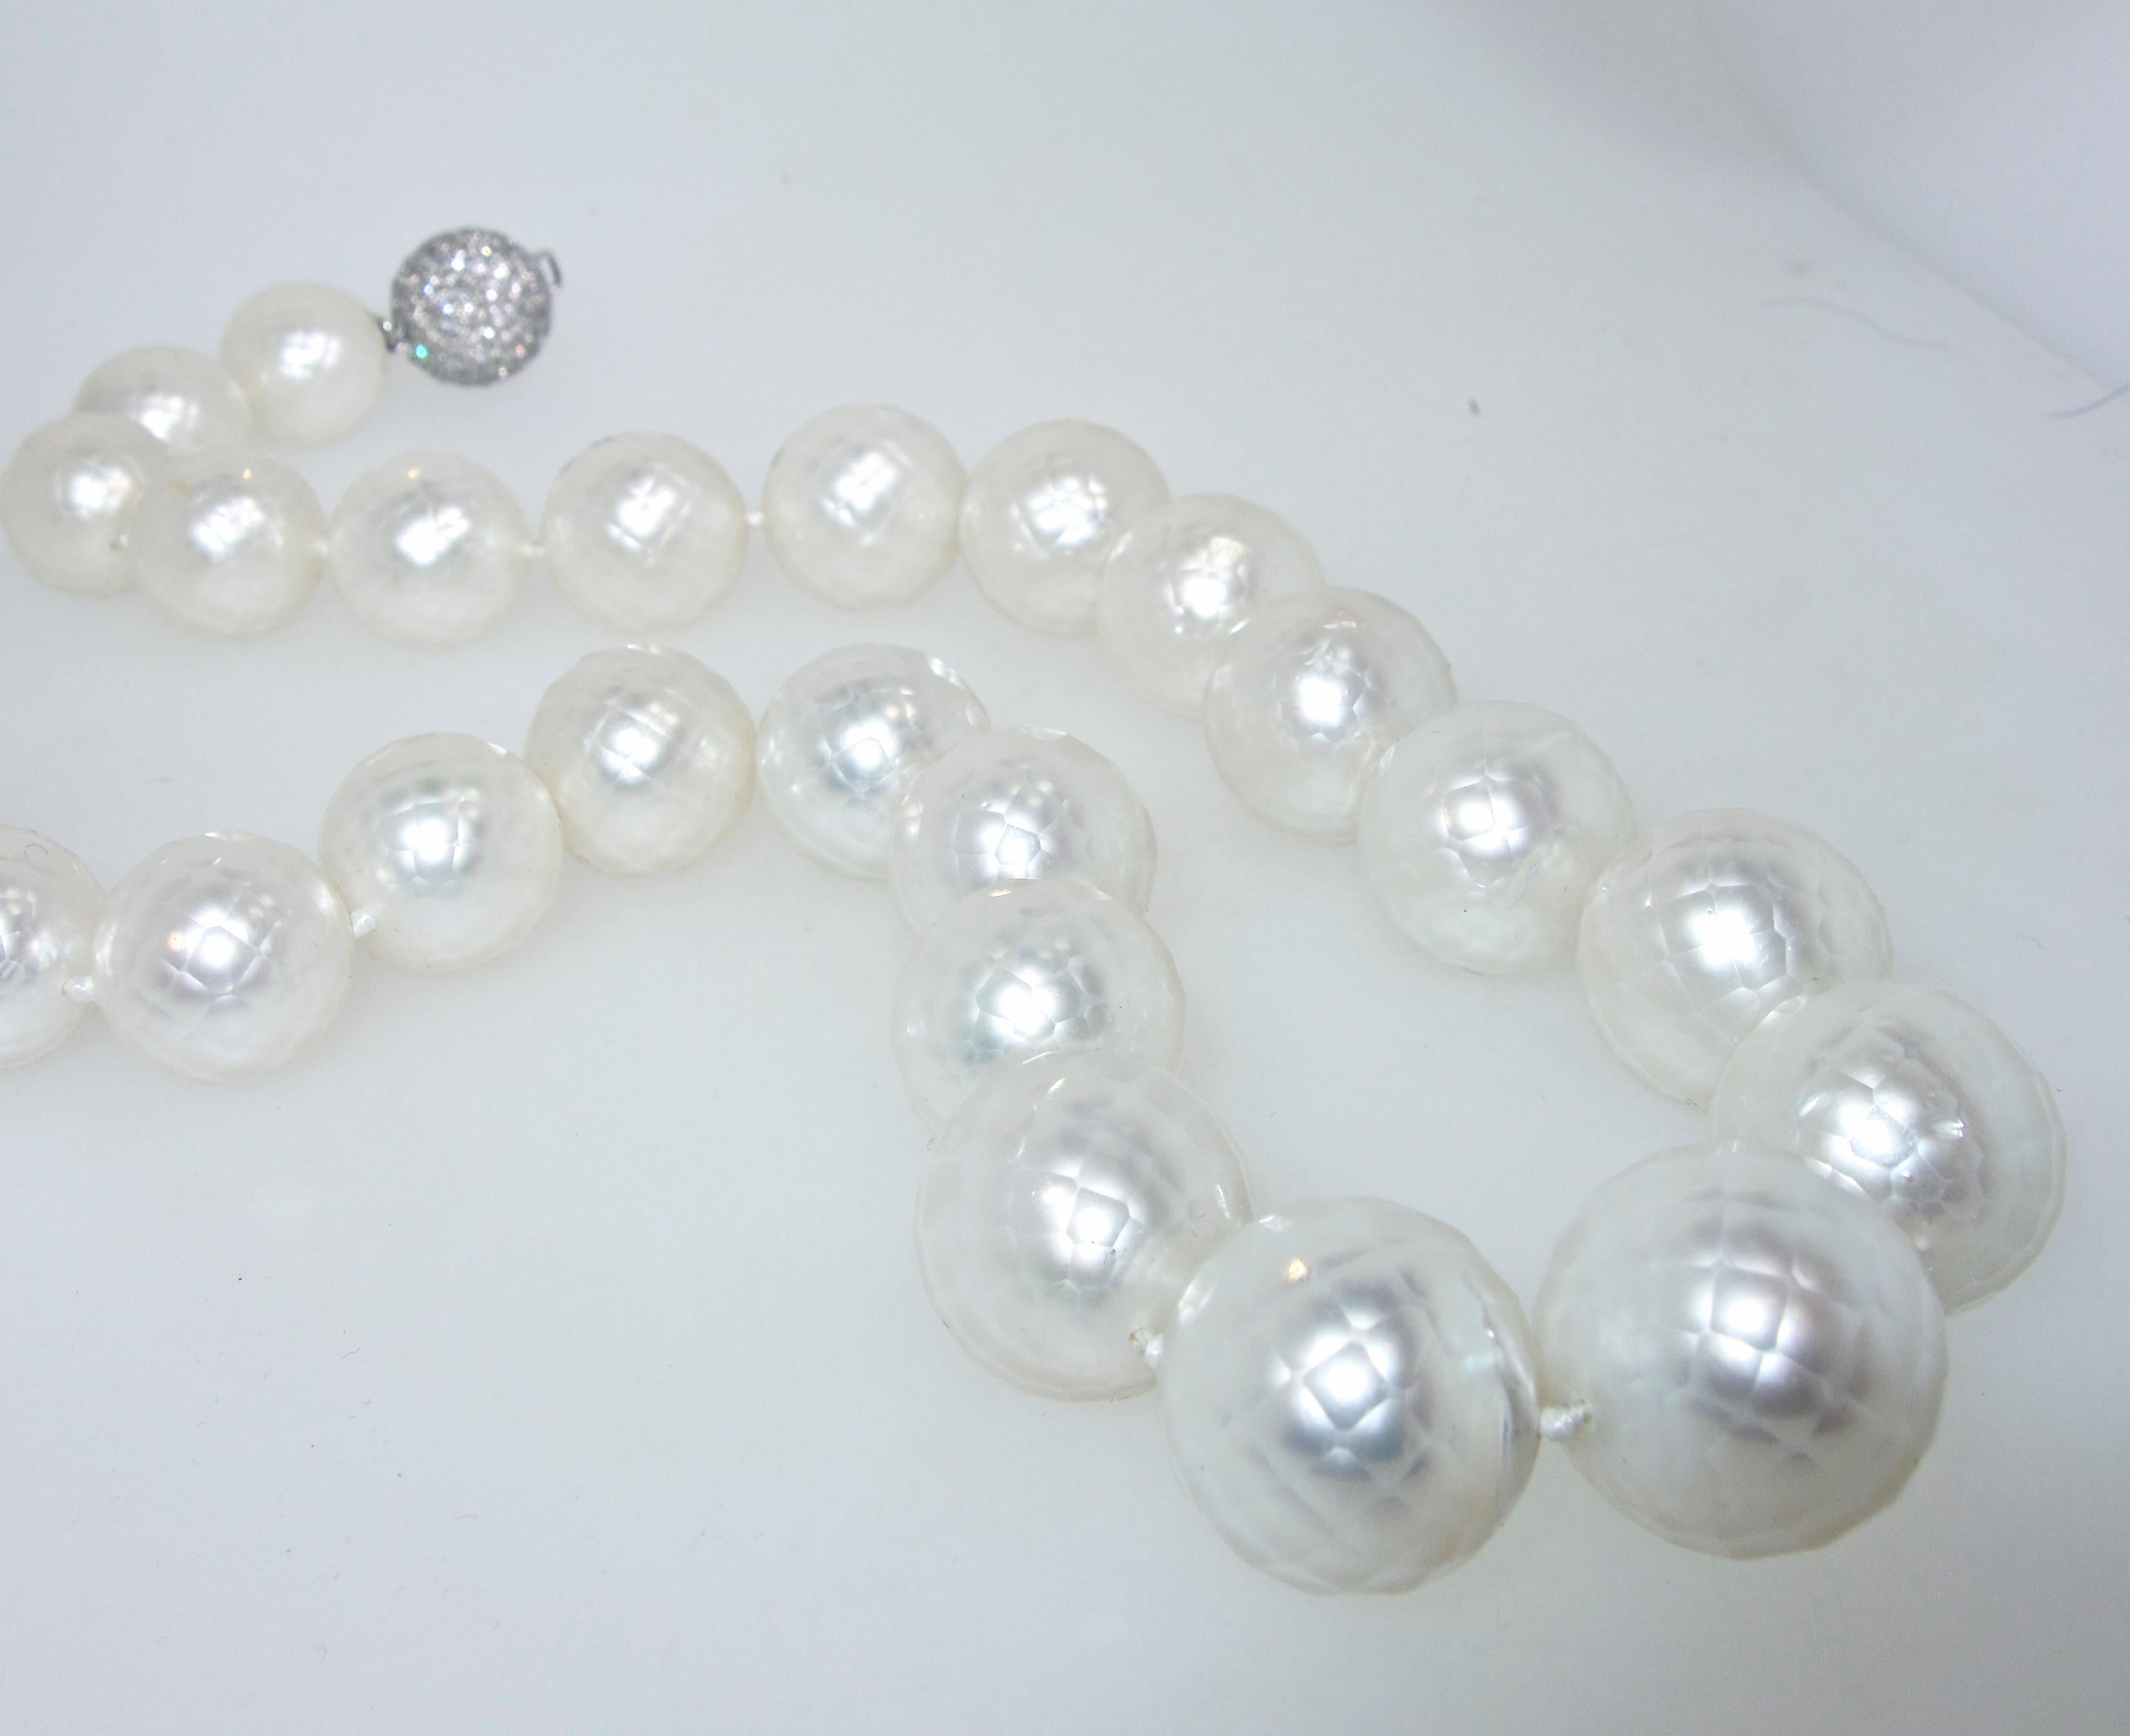 Faceted South Sea Pearls, Unusual and Distinctive with a Diamond Last im Zustand „Hervorragend“ in Aspen, CO